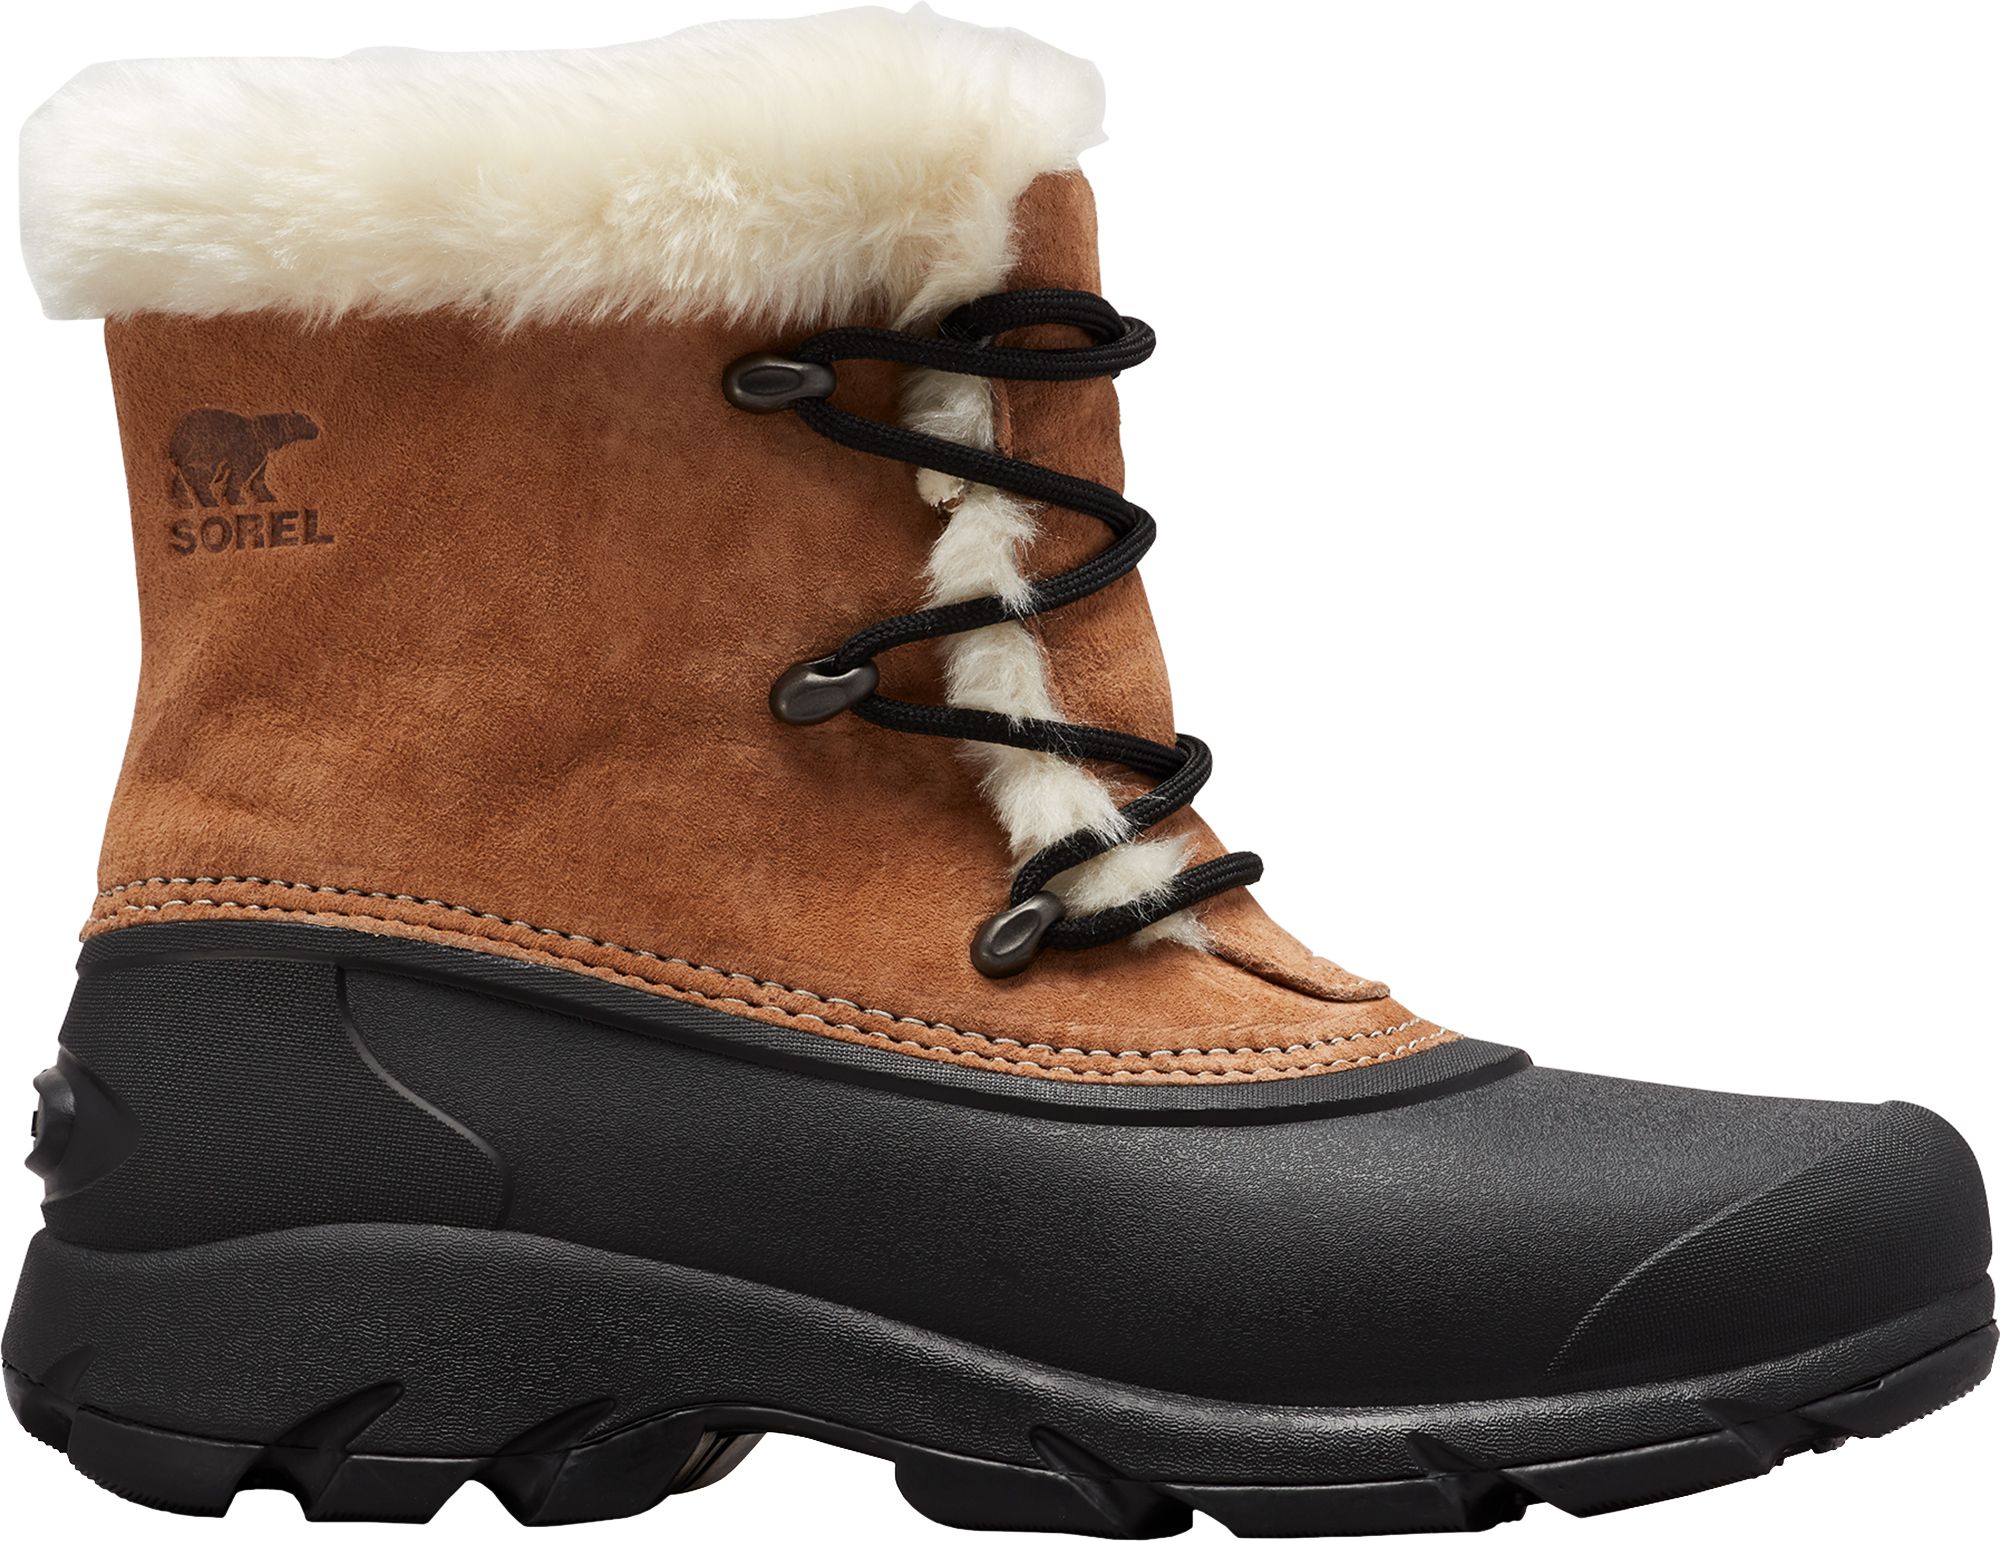 women's snow boots with fur